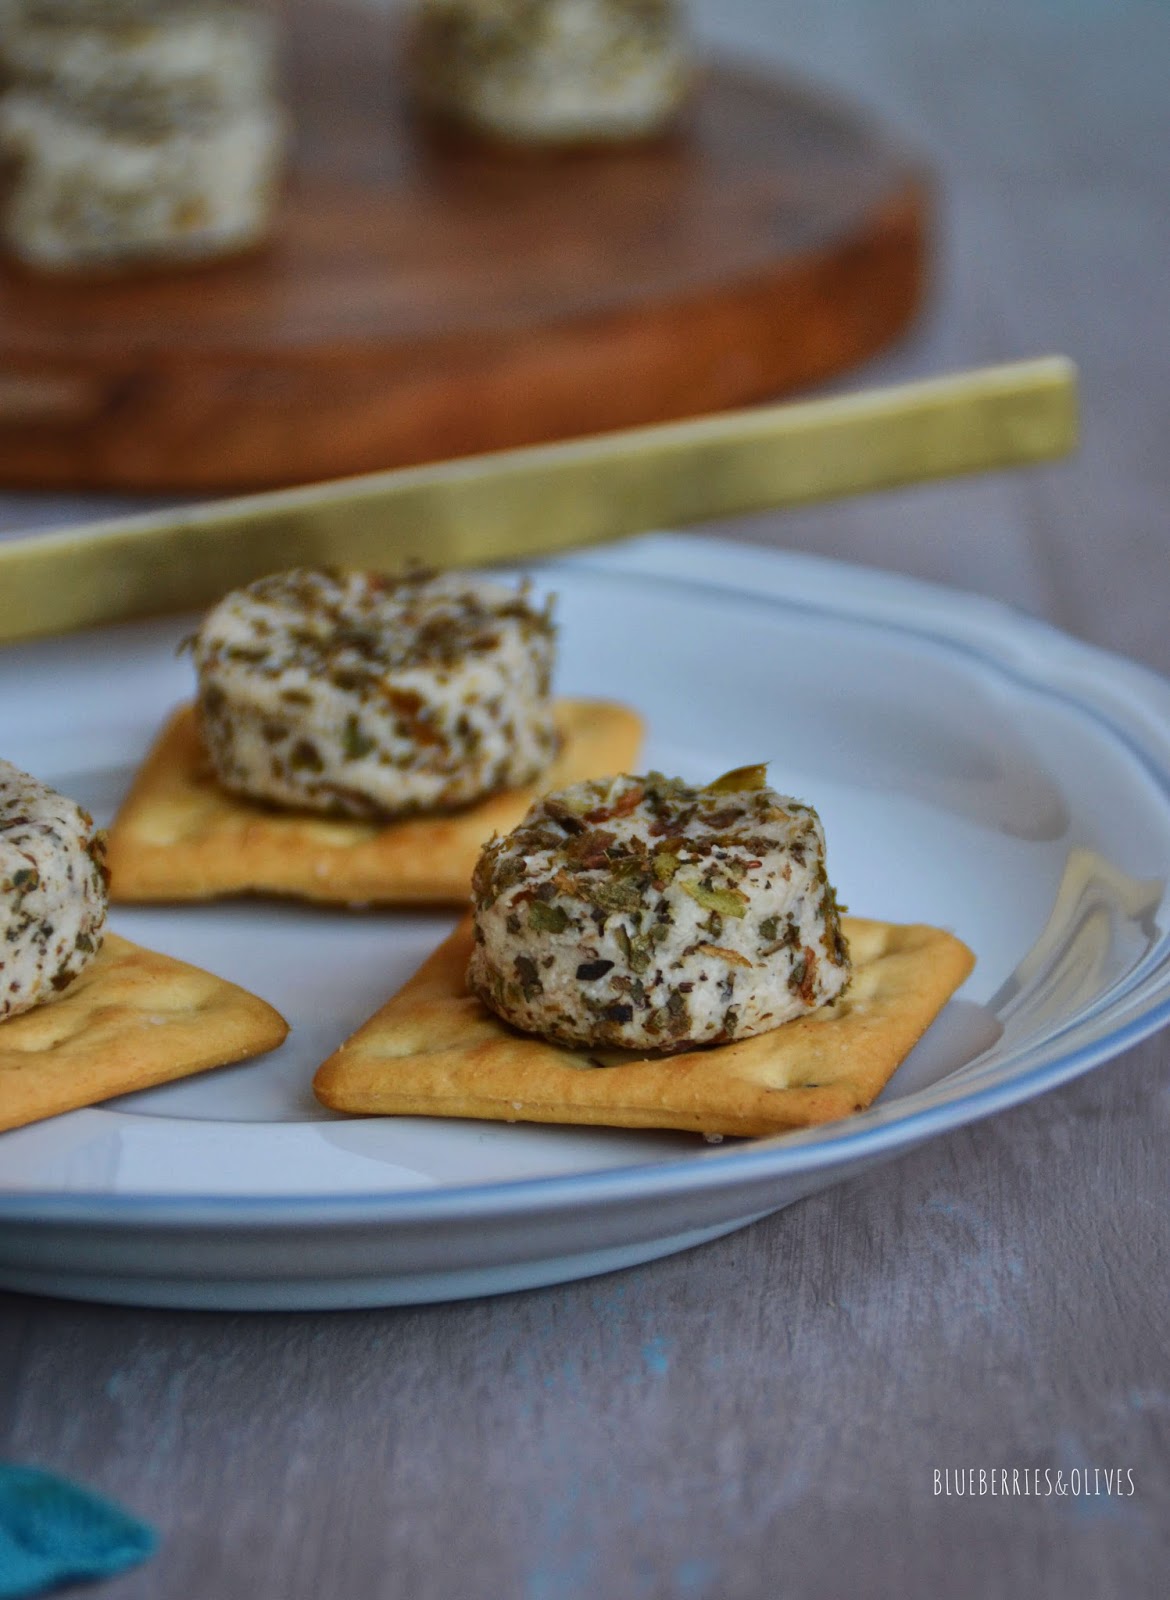 MINI "CHEESES" WITH FINE HERBS 